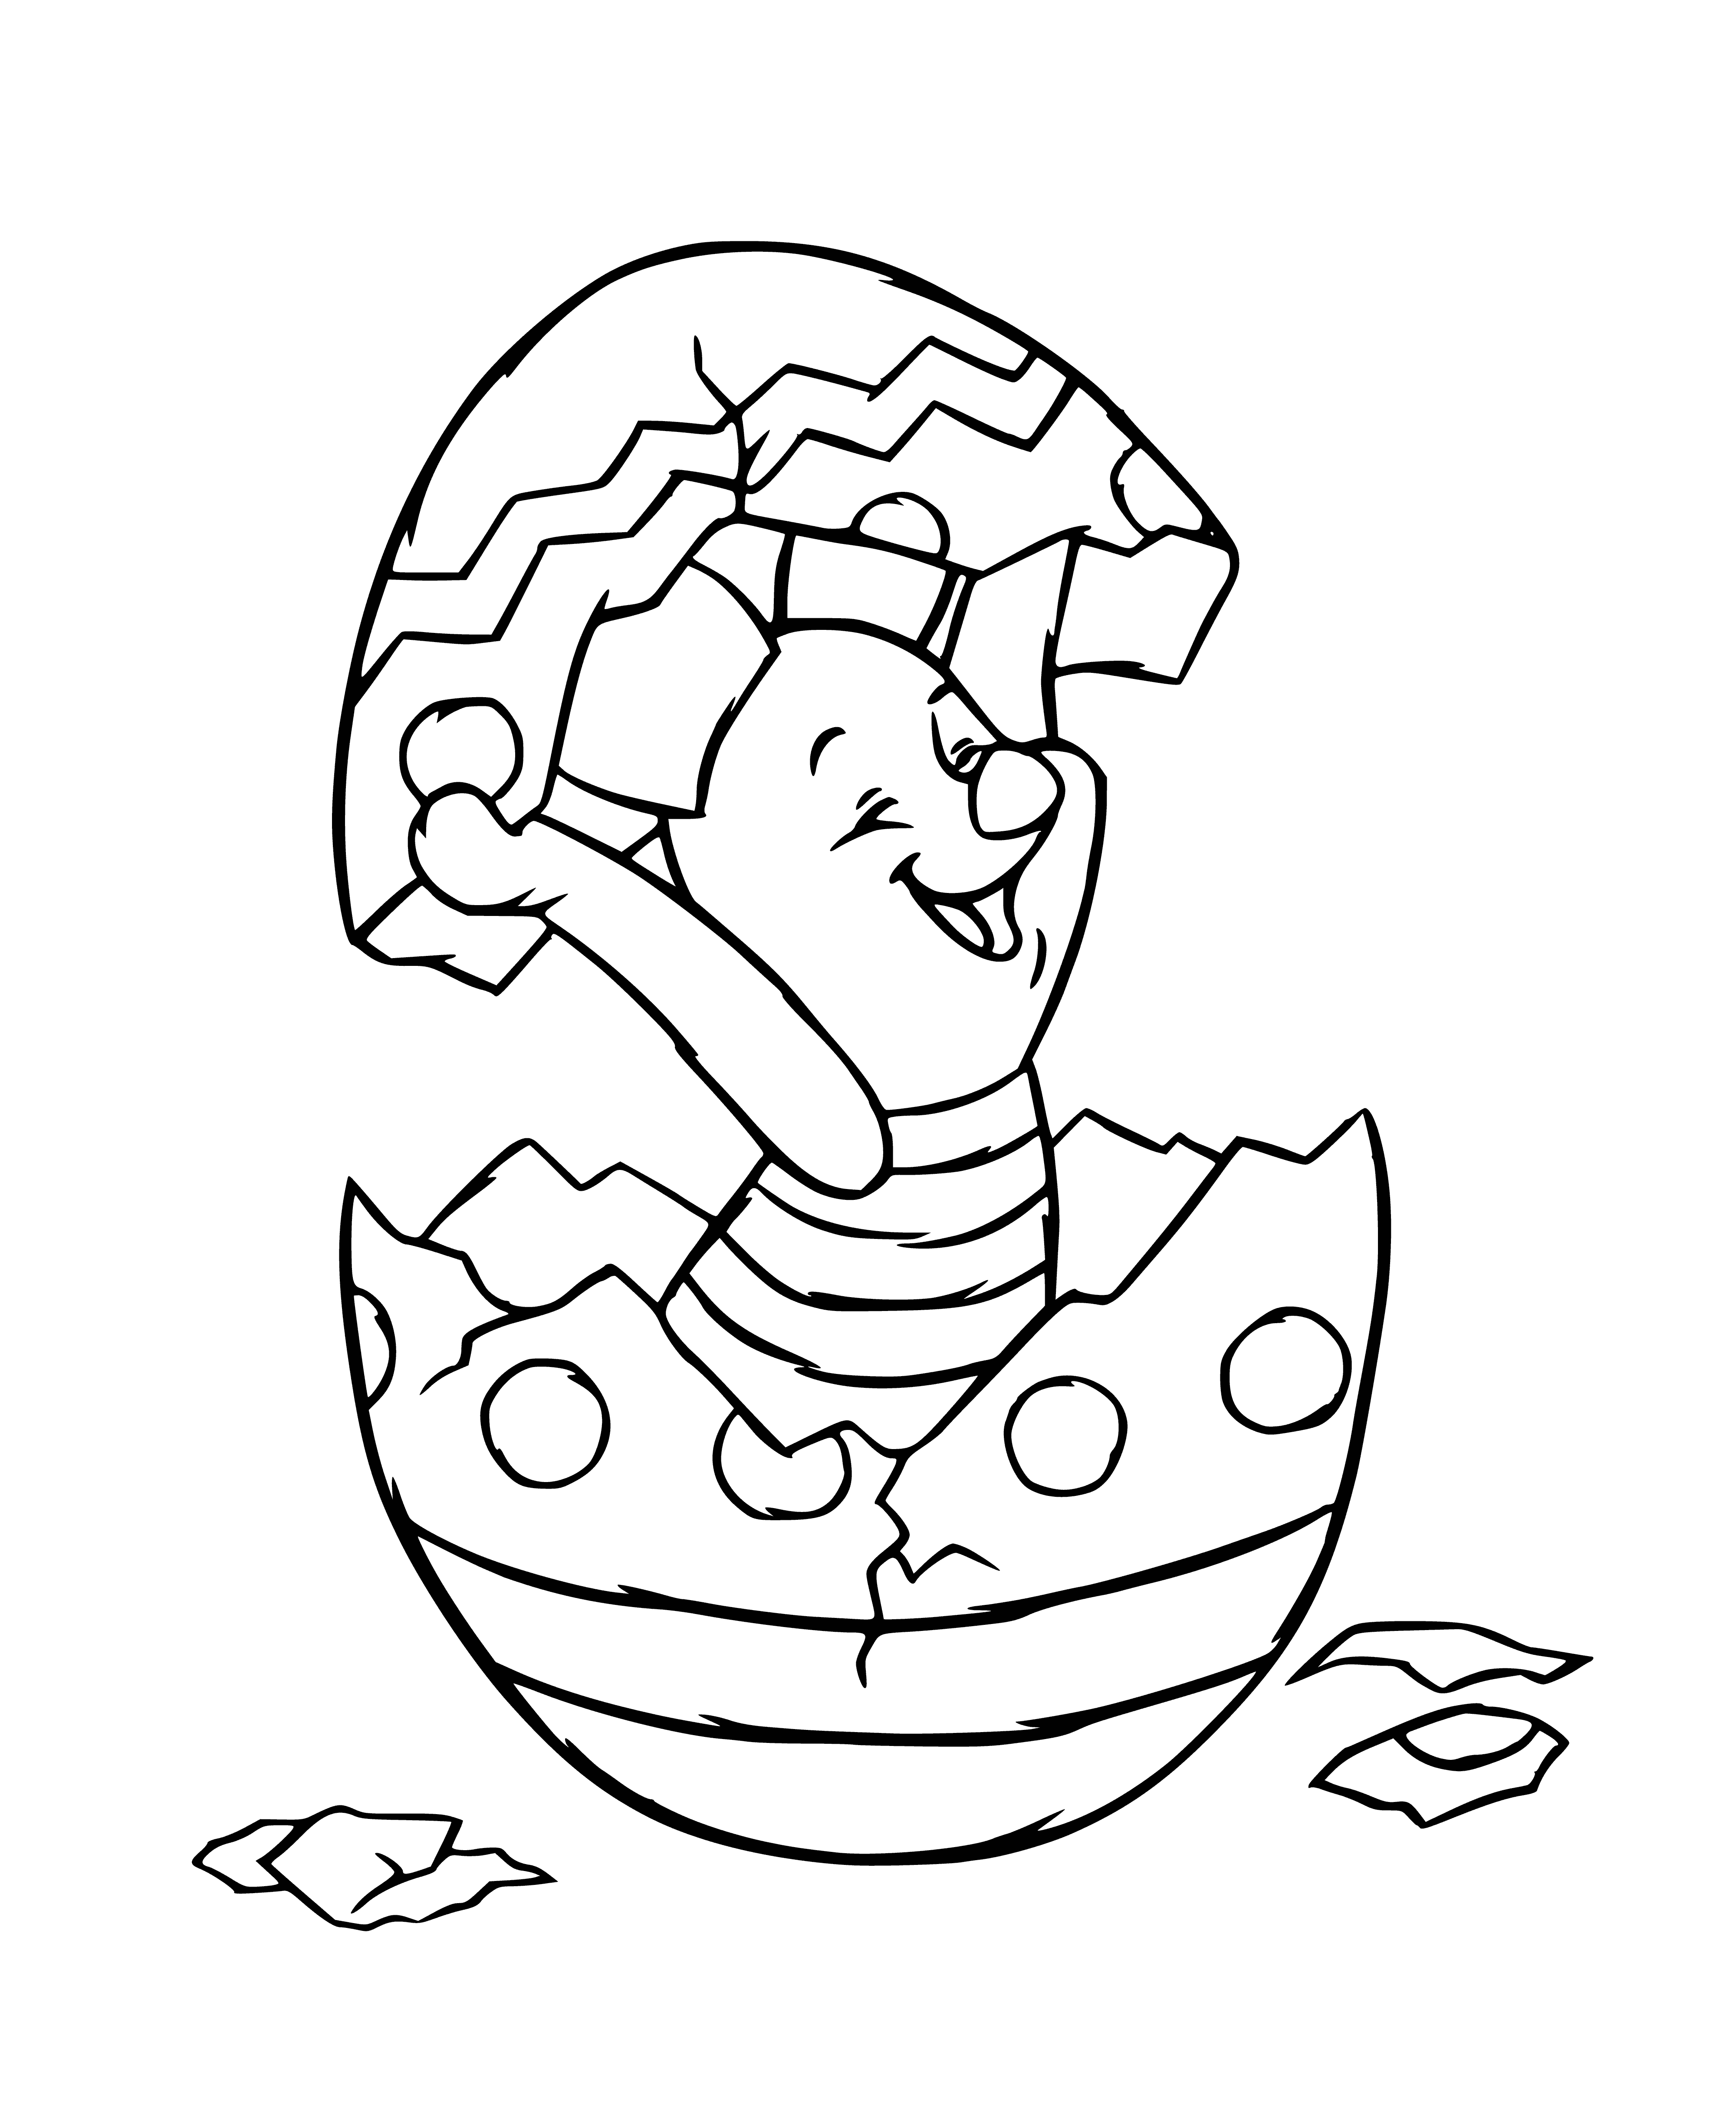 coloring page: Small pink pig stands in a green field, holding an Easter basket in its mouth, puffed-out cheeks, happy face.